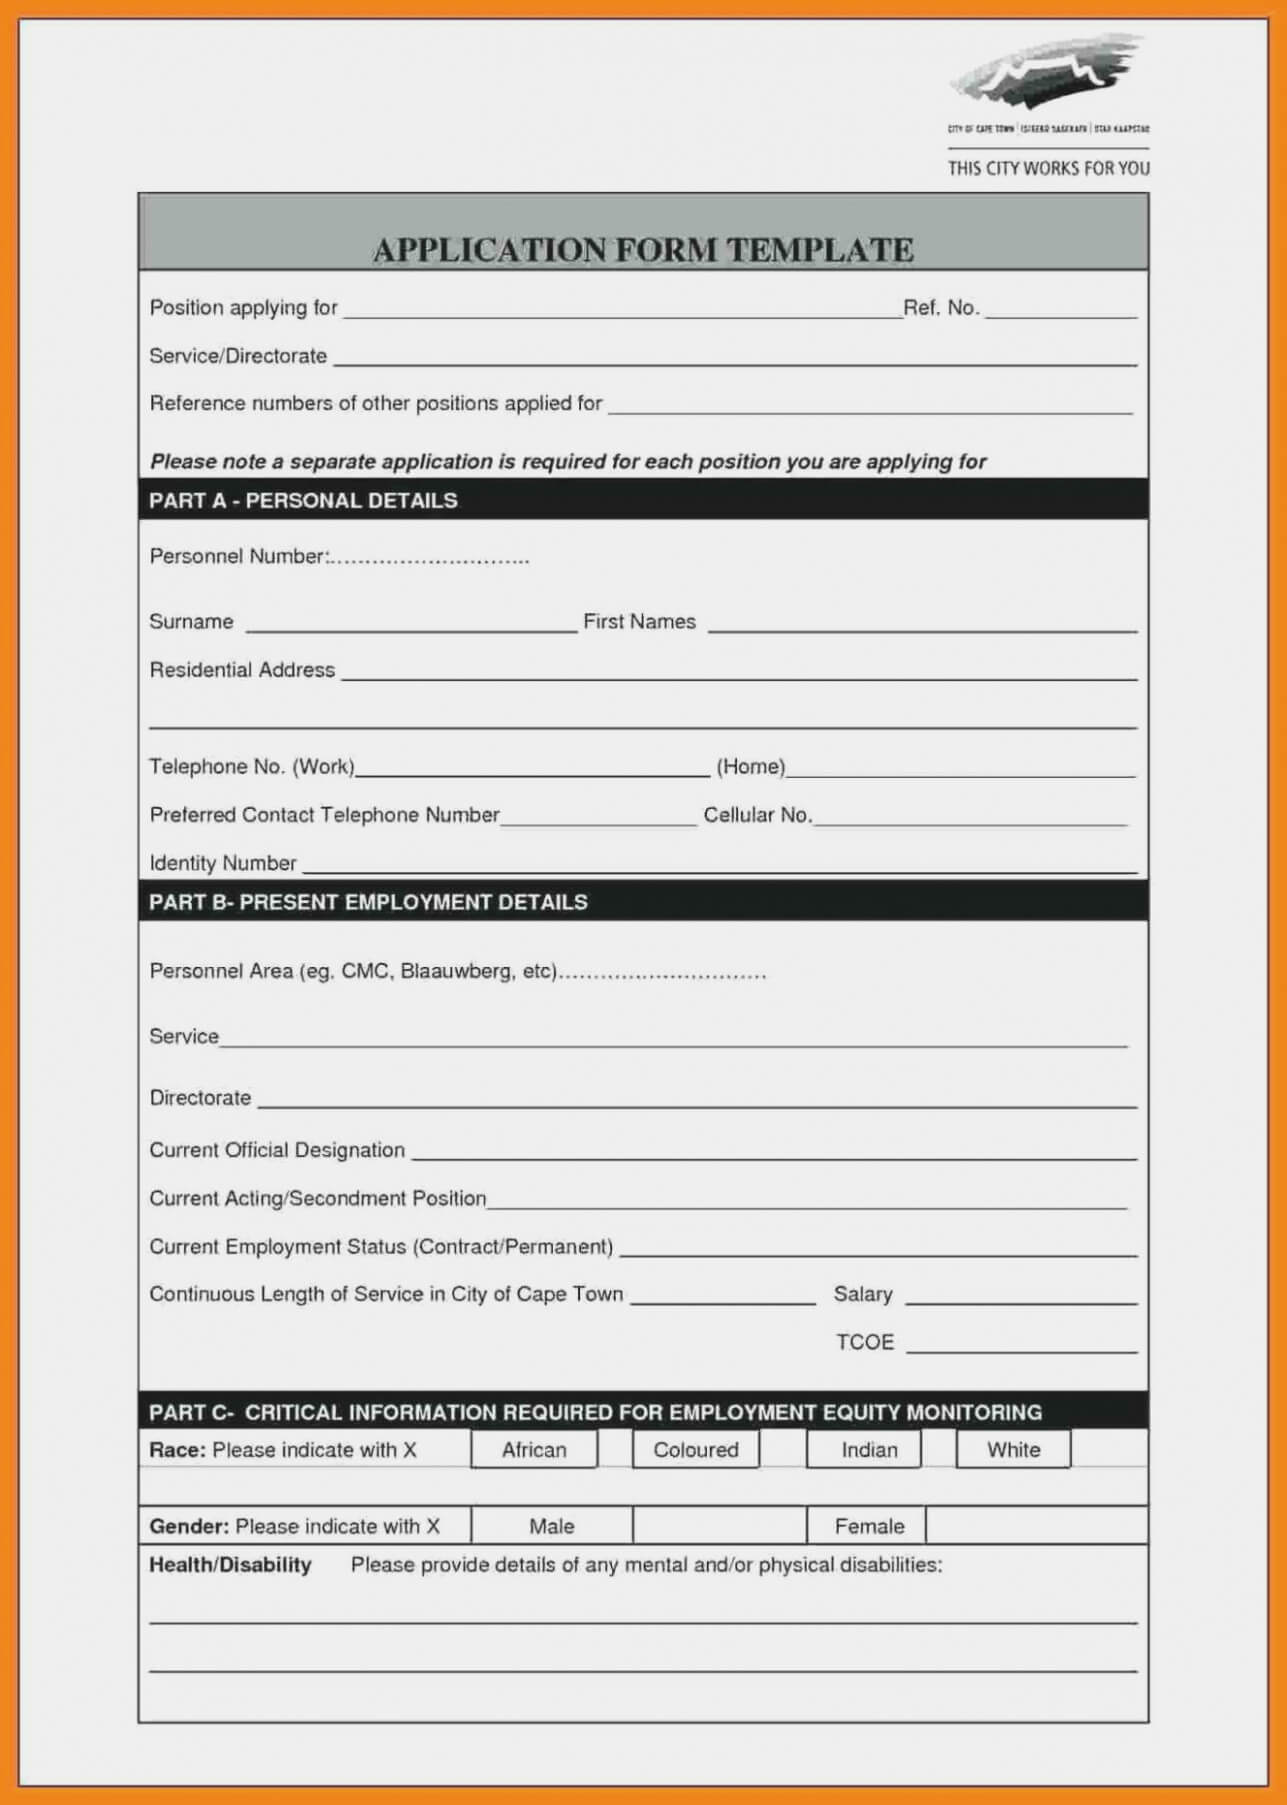 Most Effective Ways To | Realty Executives Mi : Invoice And Throughout Job Application Template Word